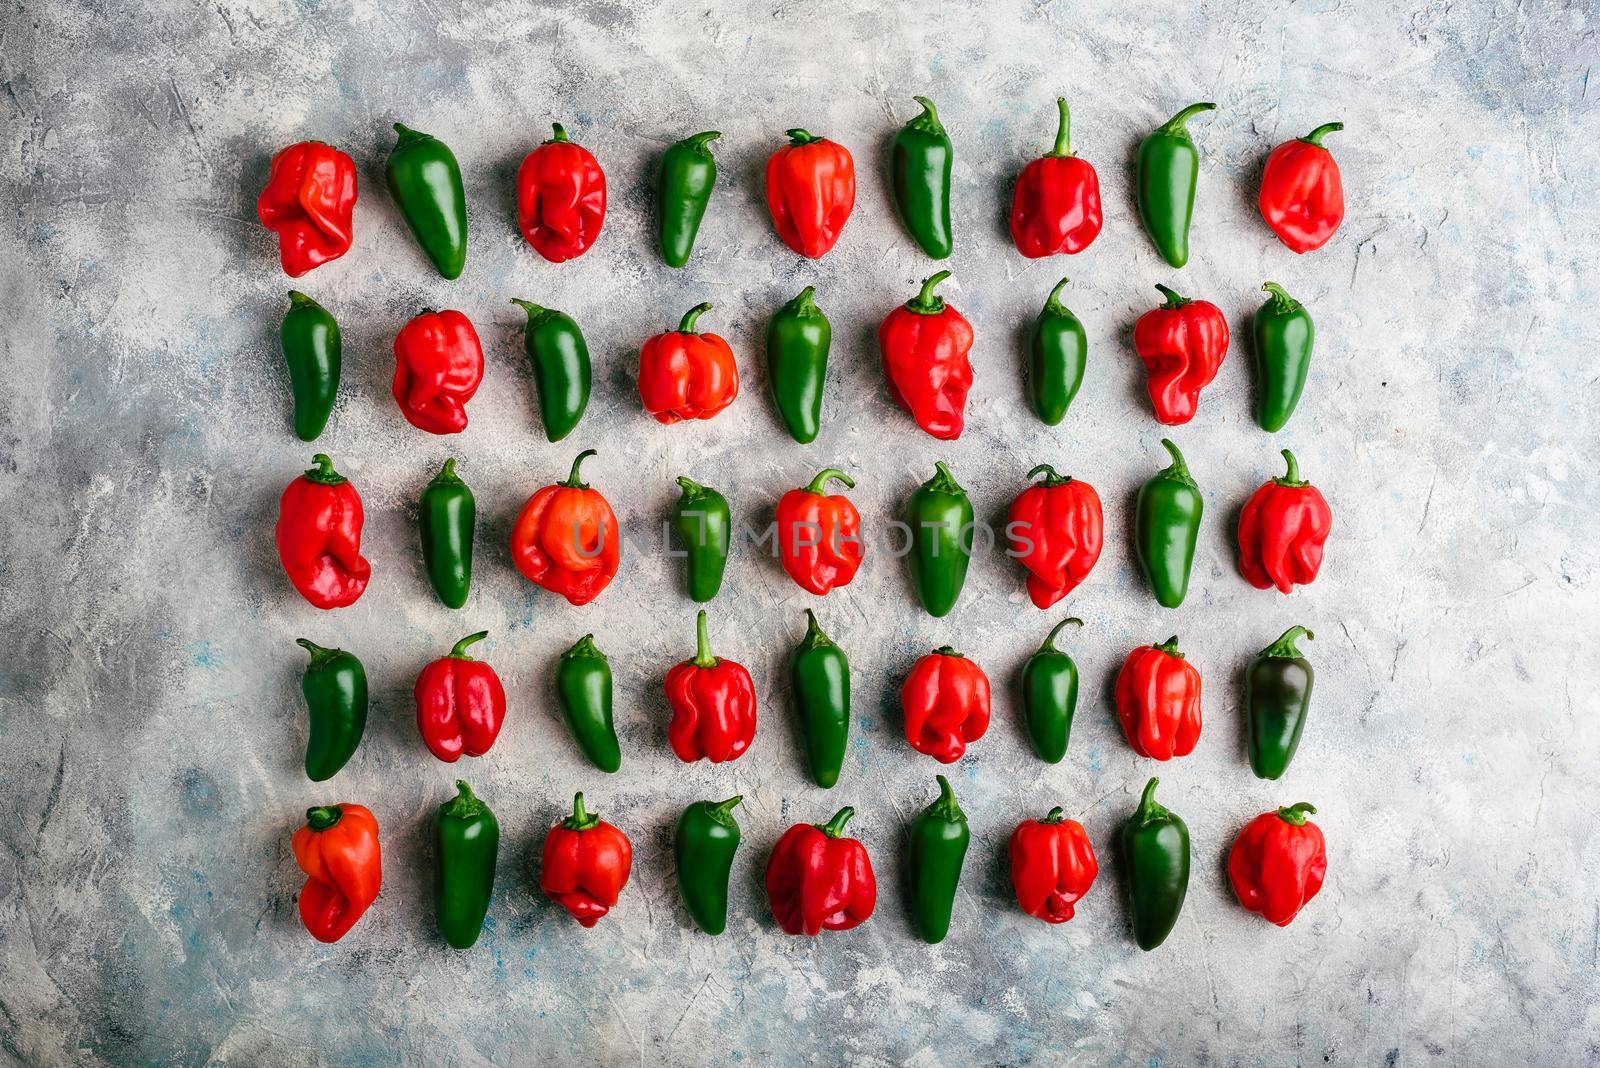 Sorted Green Jalapeno and Red Habanero Peppers on Light Concrete Surface. View from Above